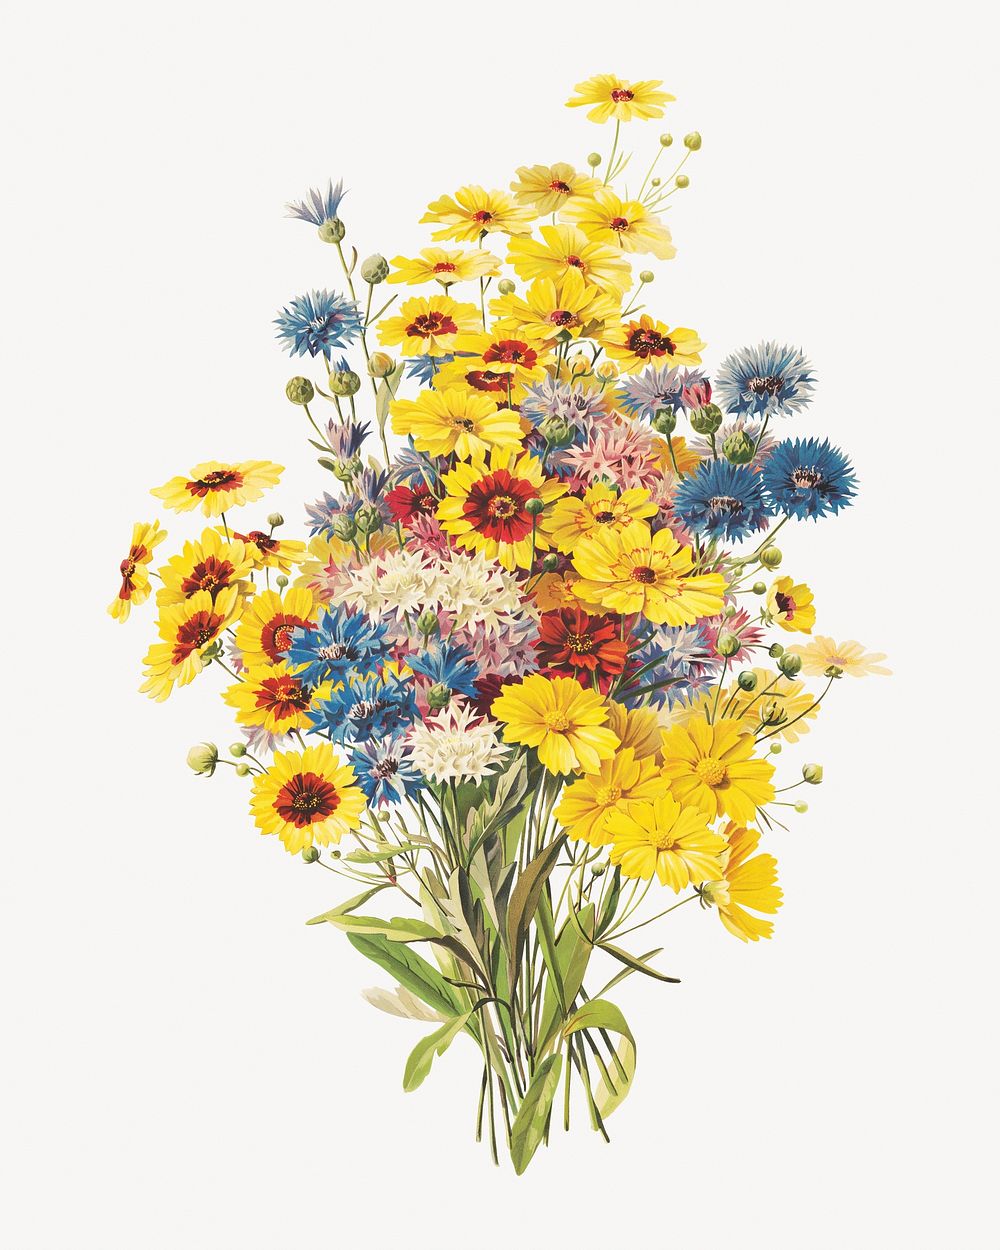 Yellow flower bouquet, vintage botanical illustration.   Remastered by rawpixel